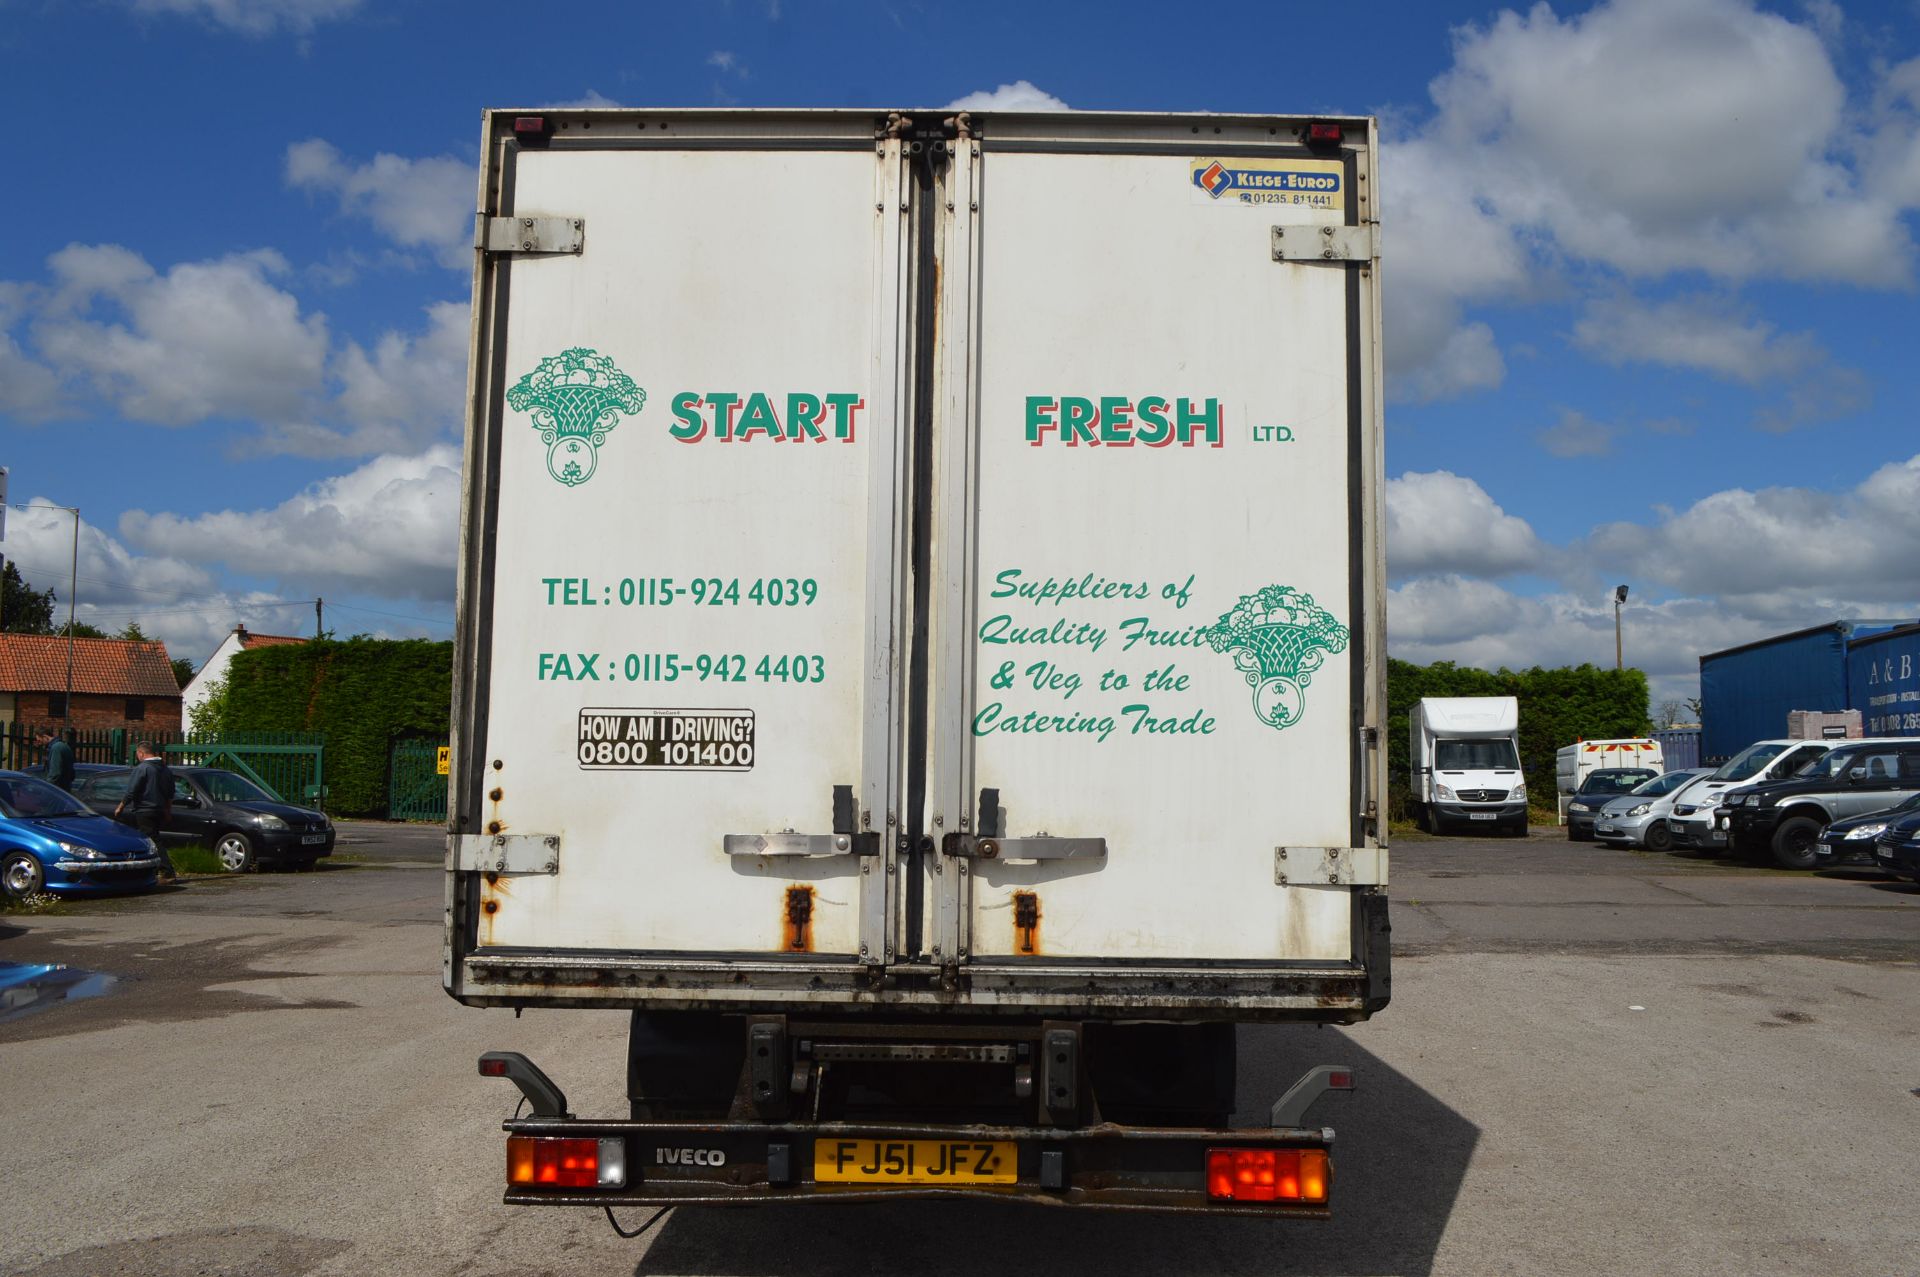 2001/51 REG IVECO-FORD CARGO TECTOR 75E17 REFRIGERATED LORRY - Image 5 of 19